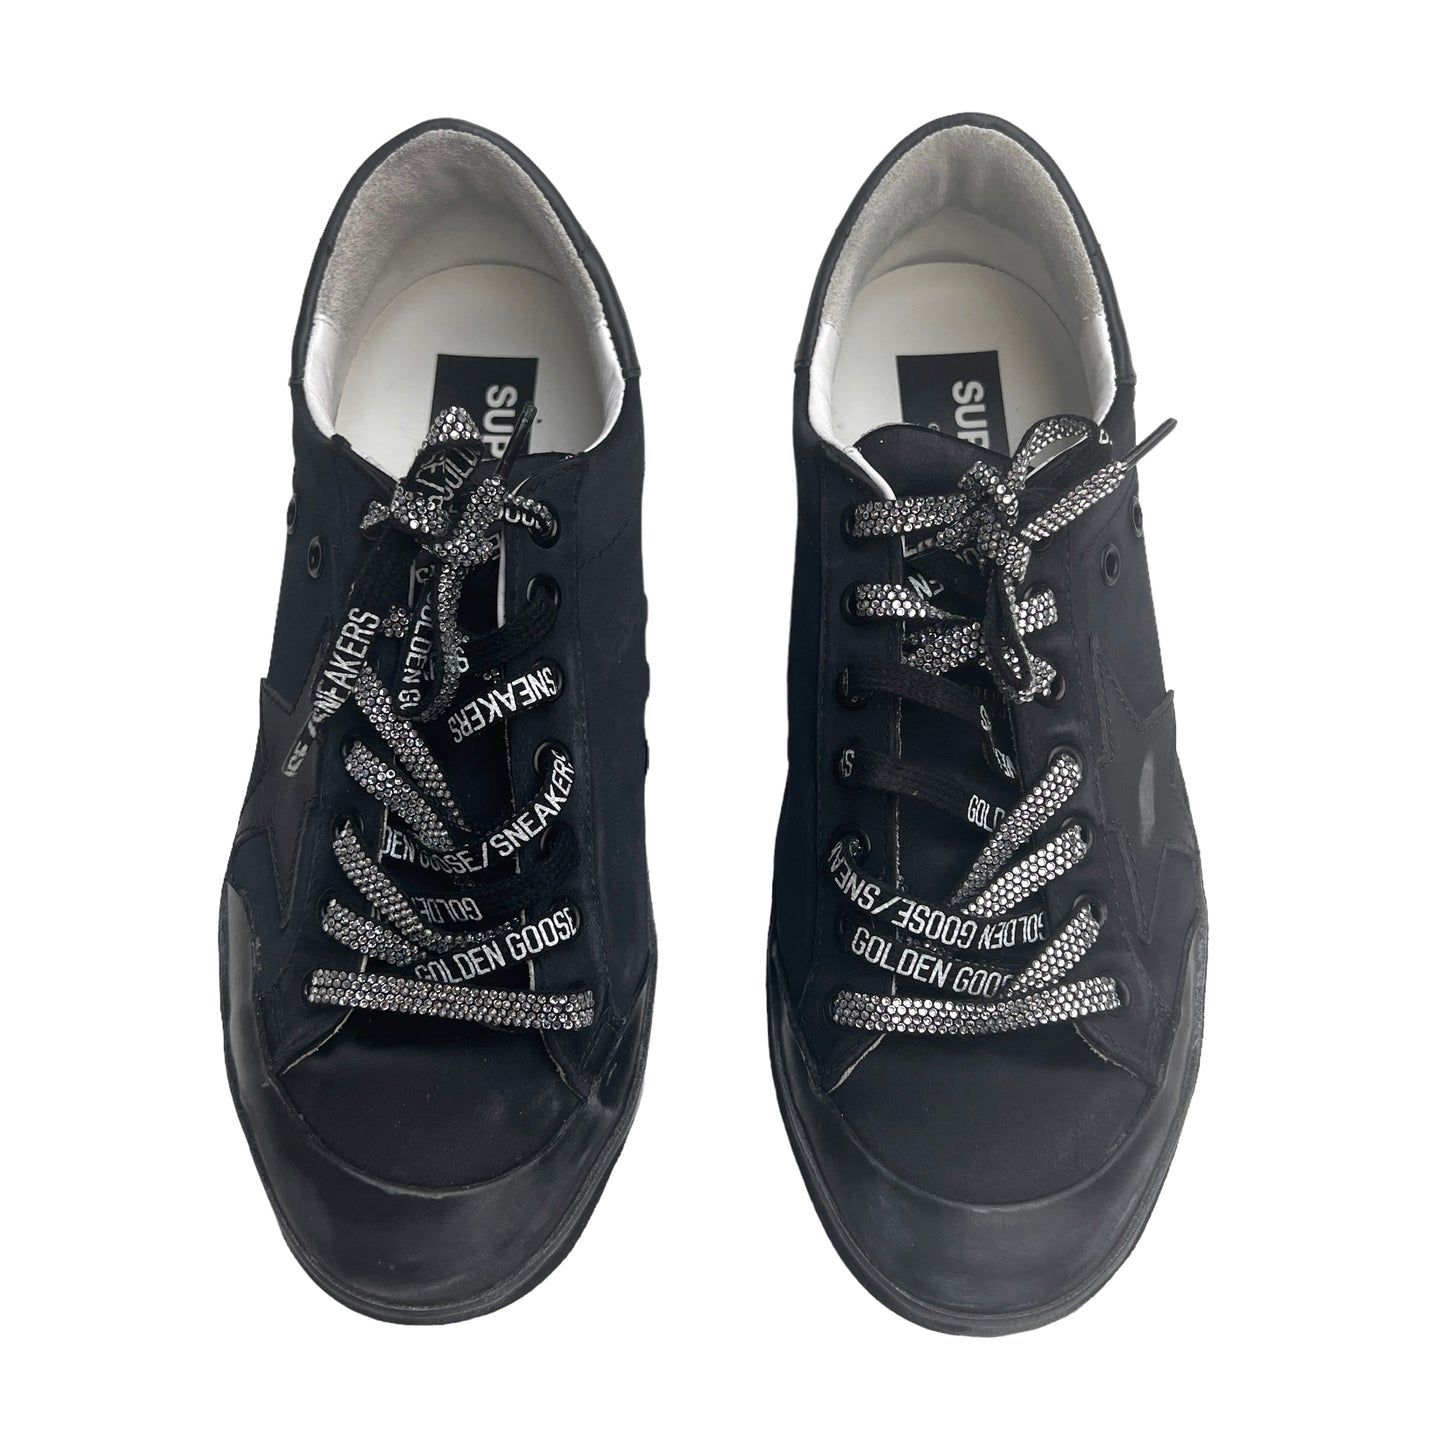 Black Sneakers with Crystals Laces - 9